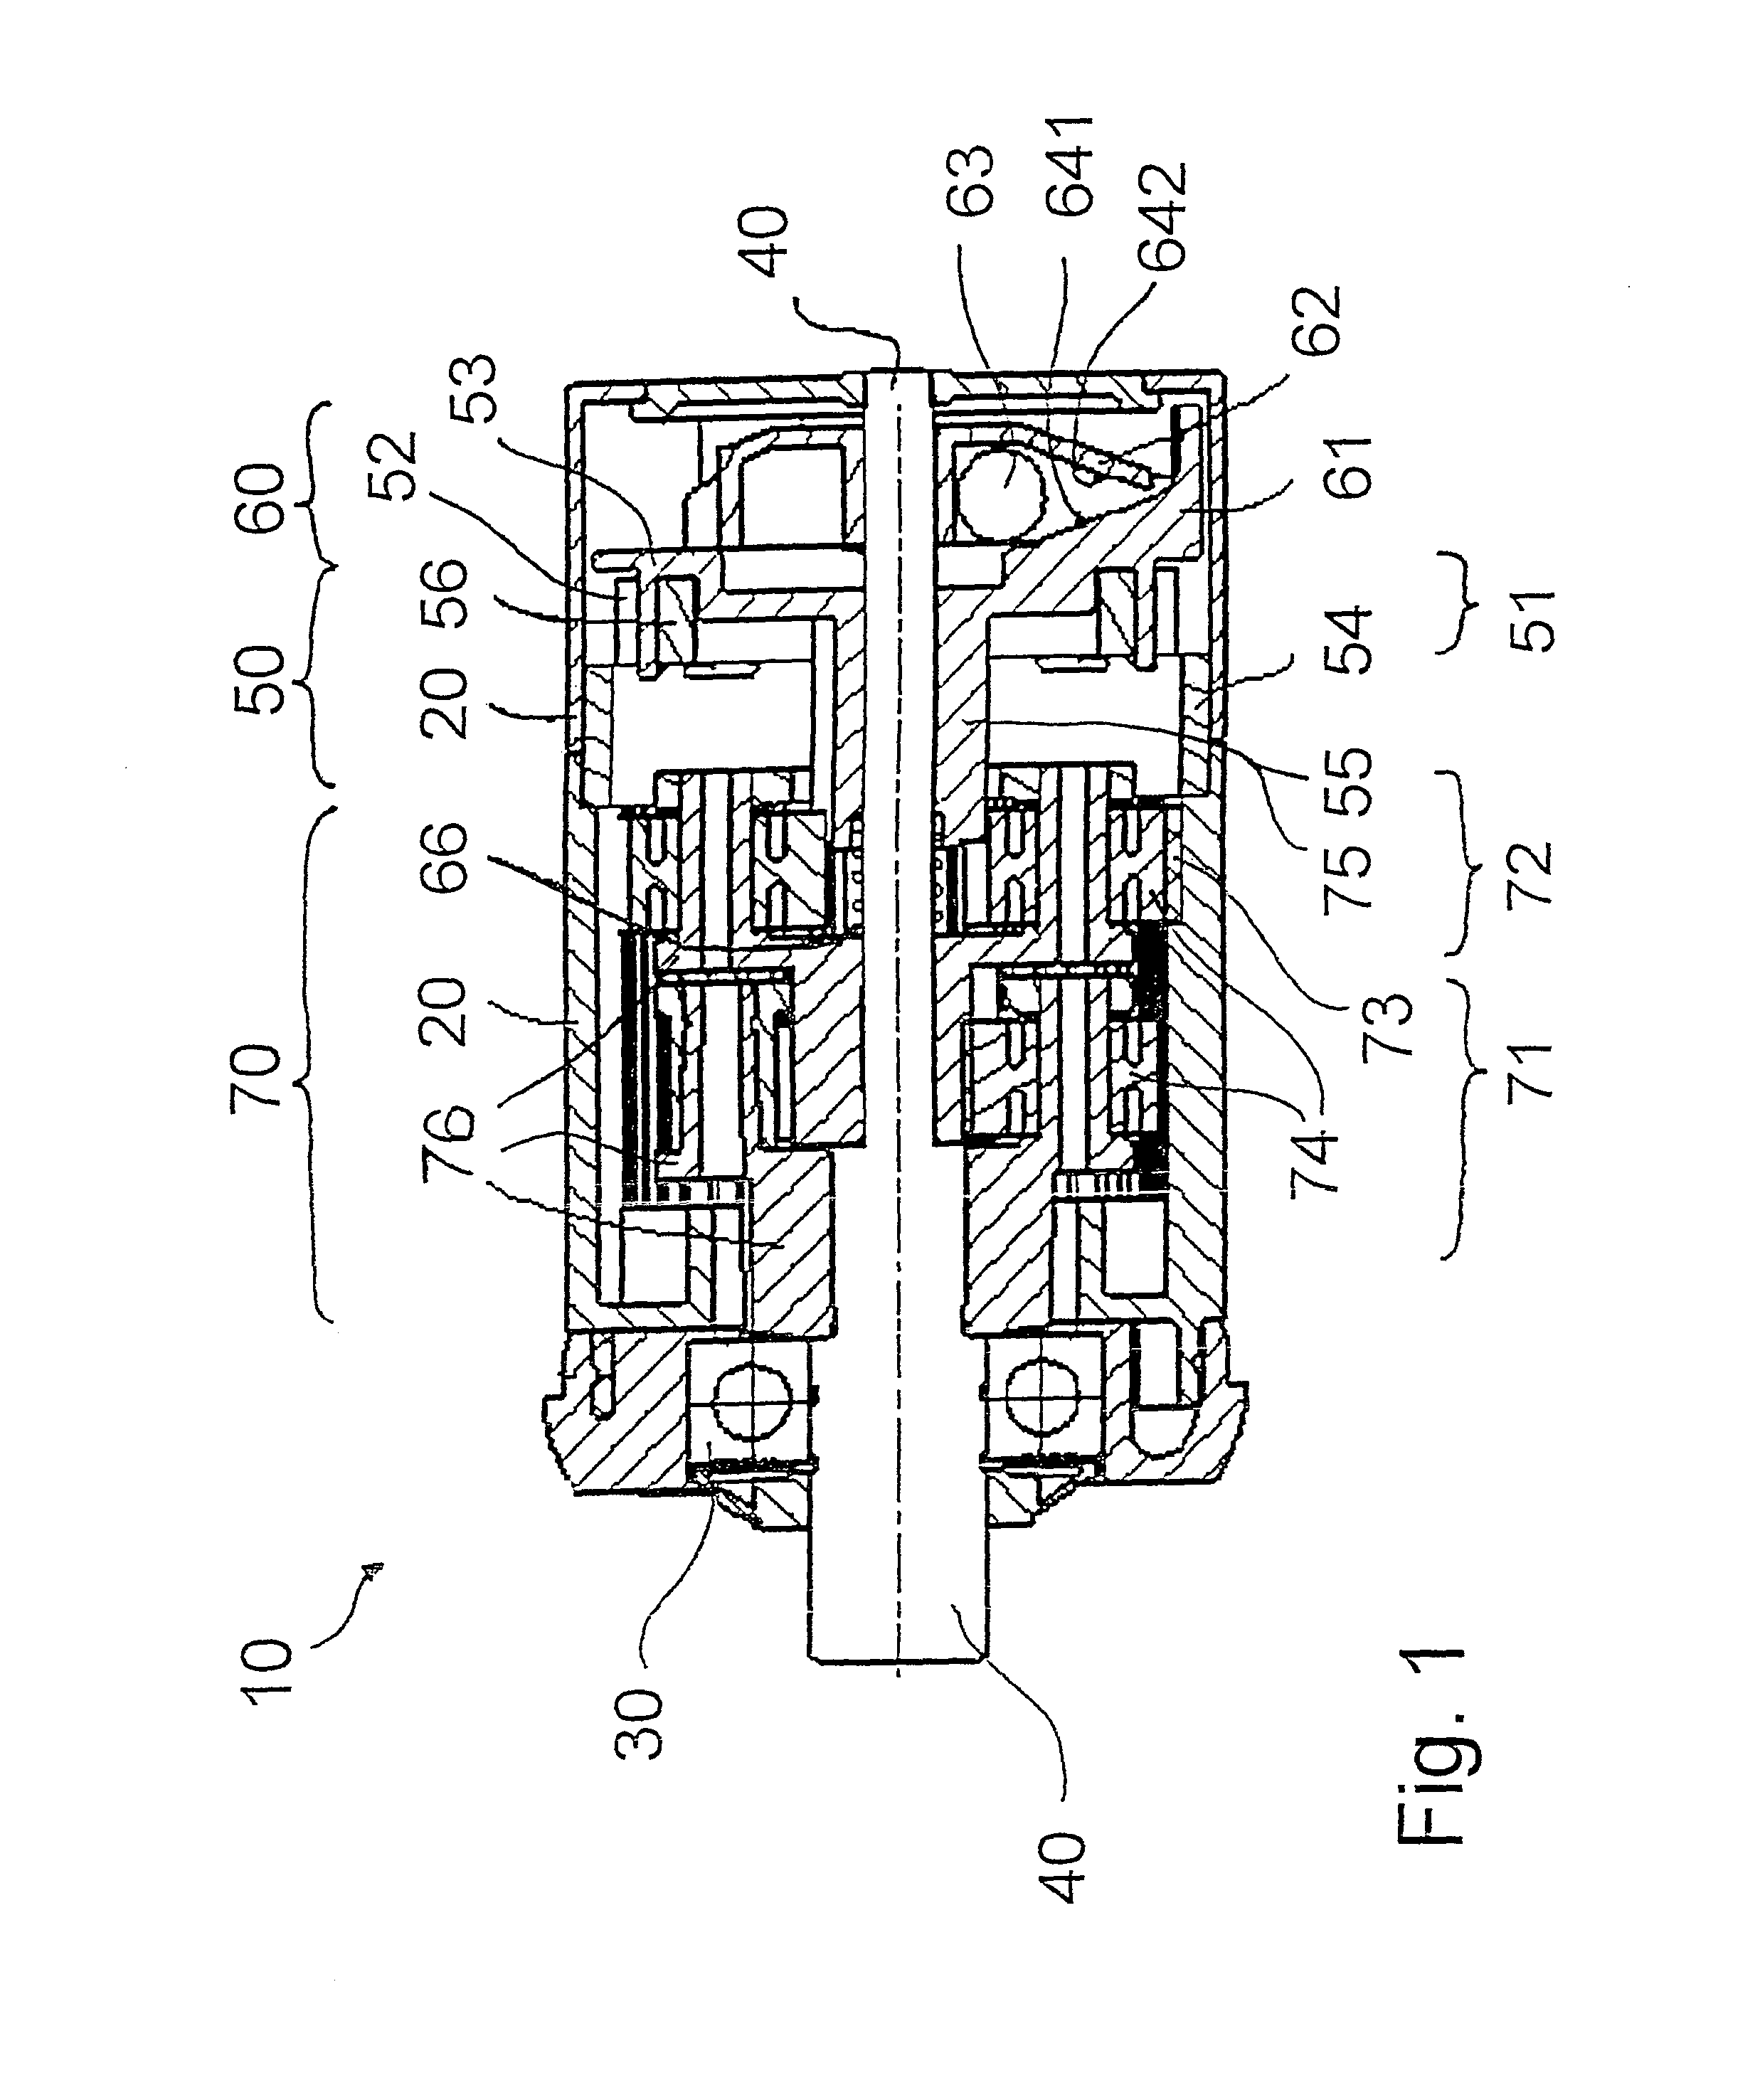 Conveyor roll with centrifugal force-operated magnetic brake